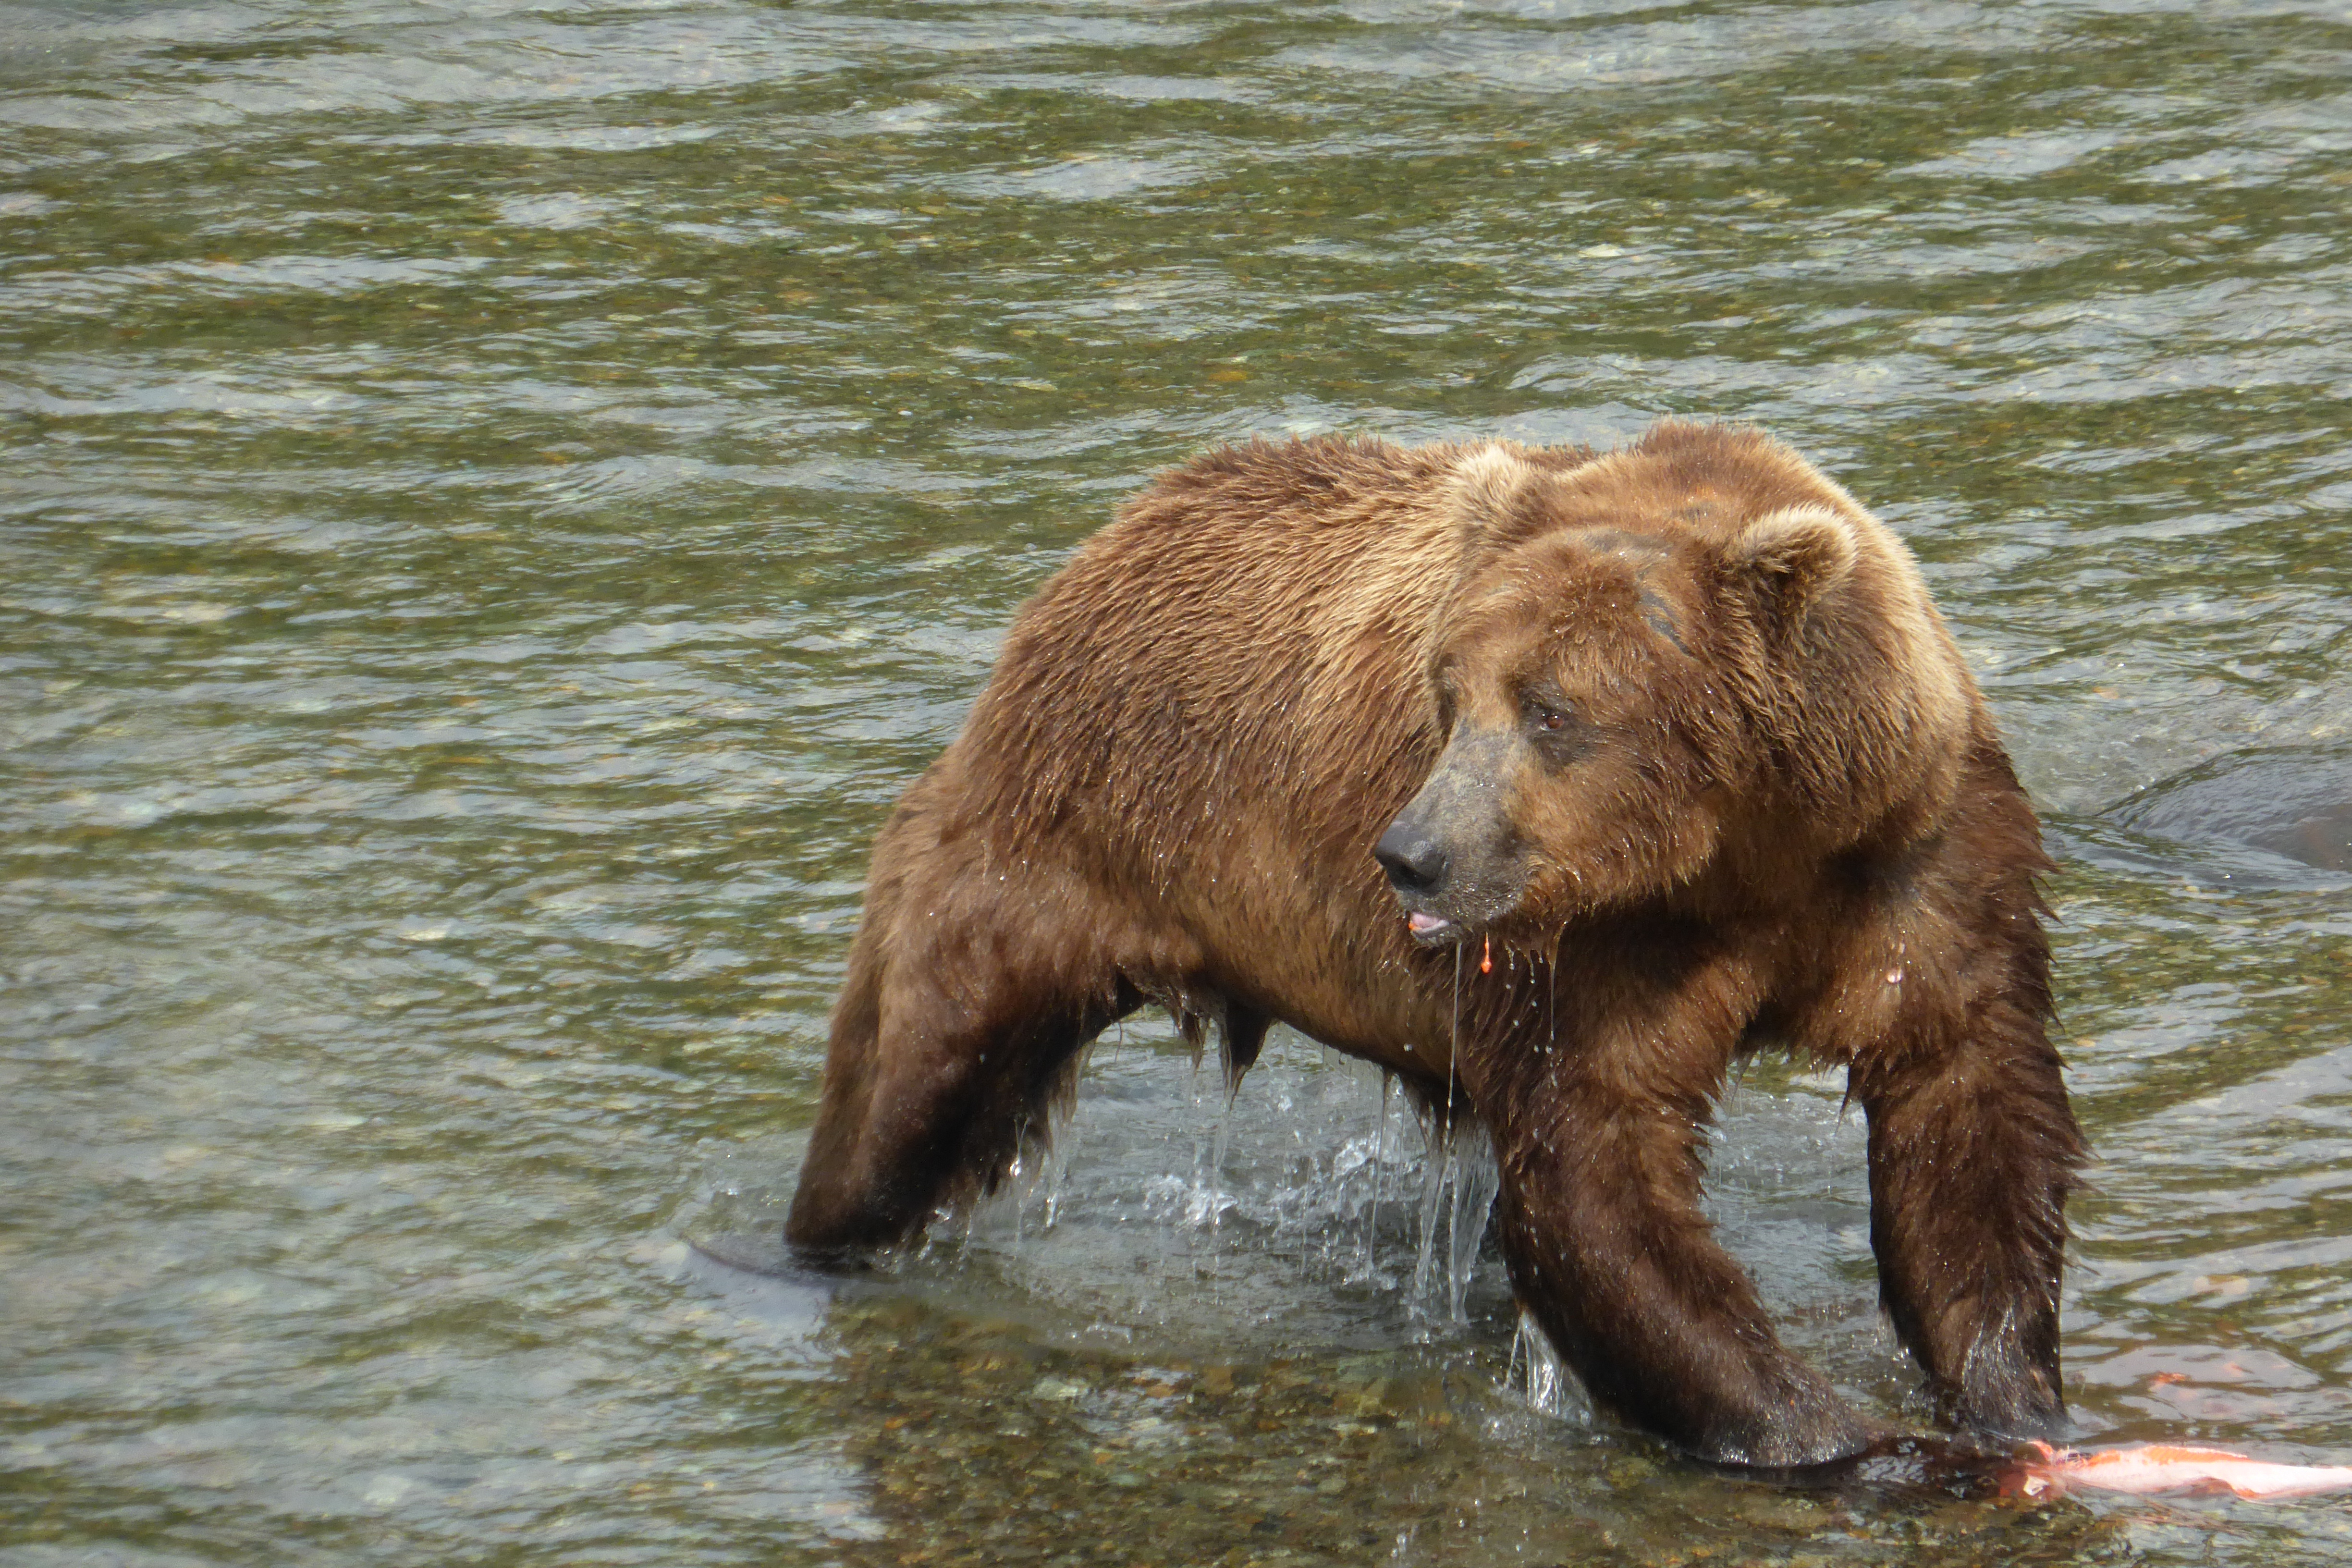 A large brown bear stands in shallow water. He looks toward the left side of the photo. A partly eaten salmon rests at his front paws.